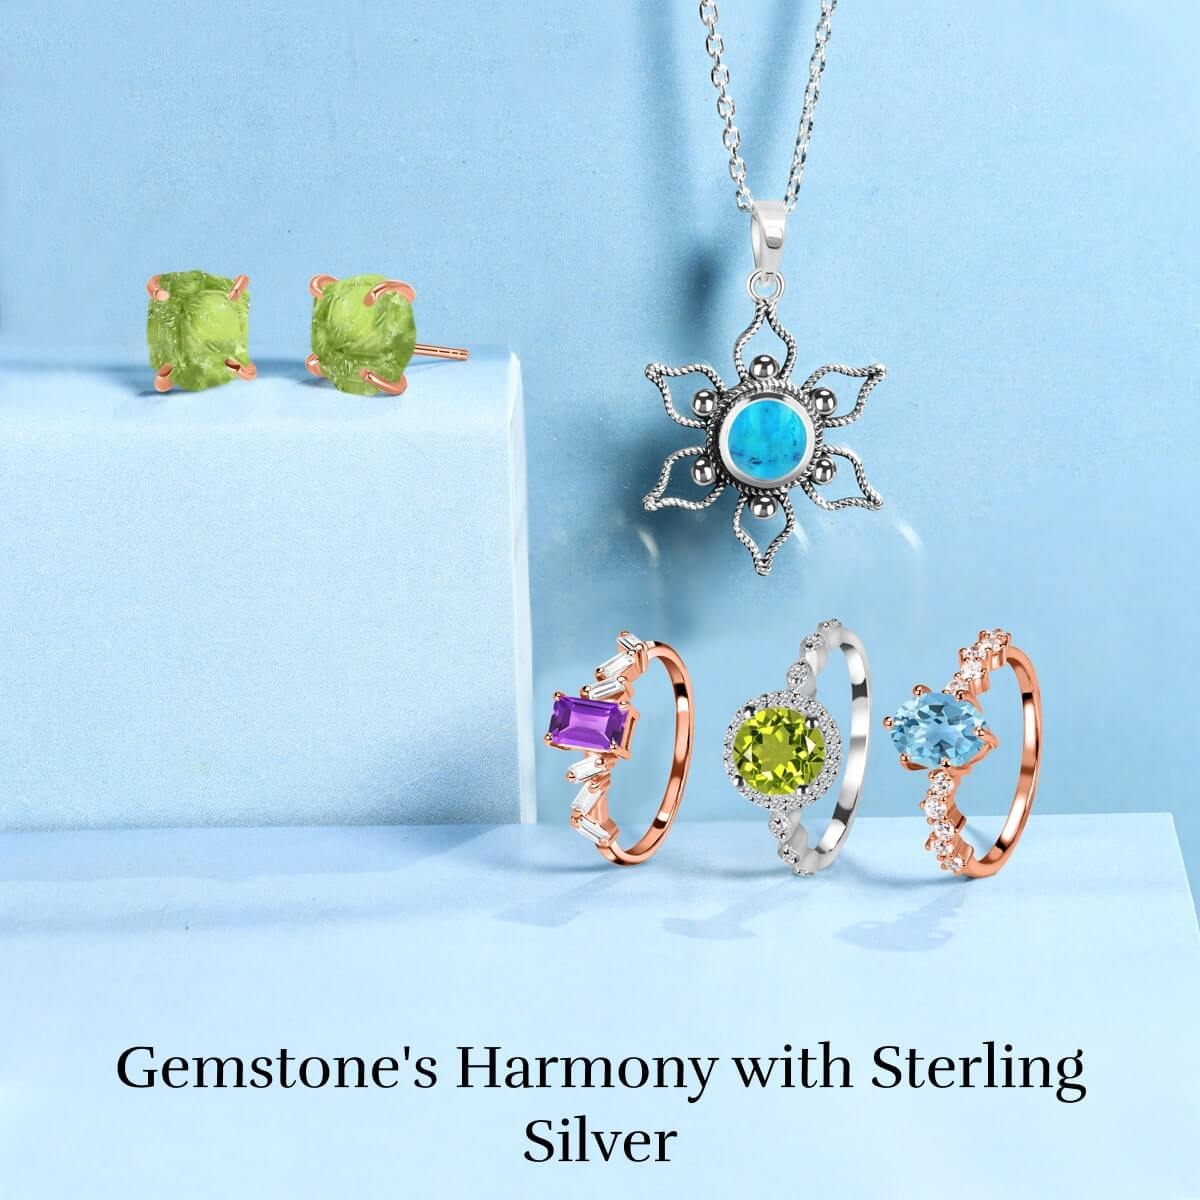 Gemstone Works Best With Sterling Silver Jewelry